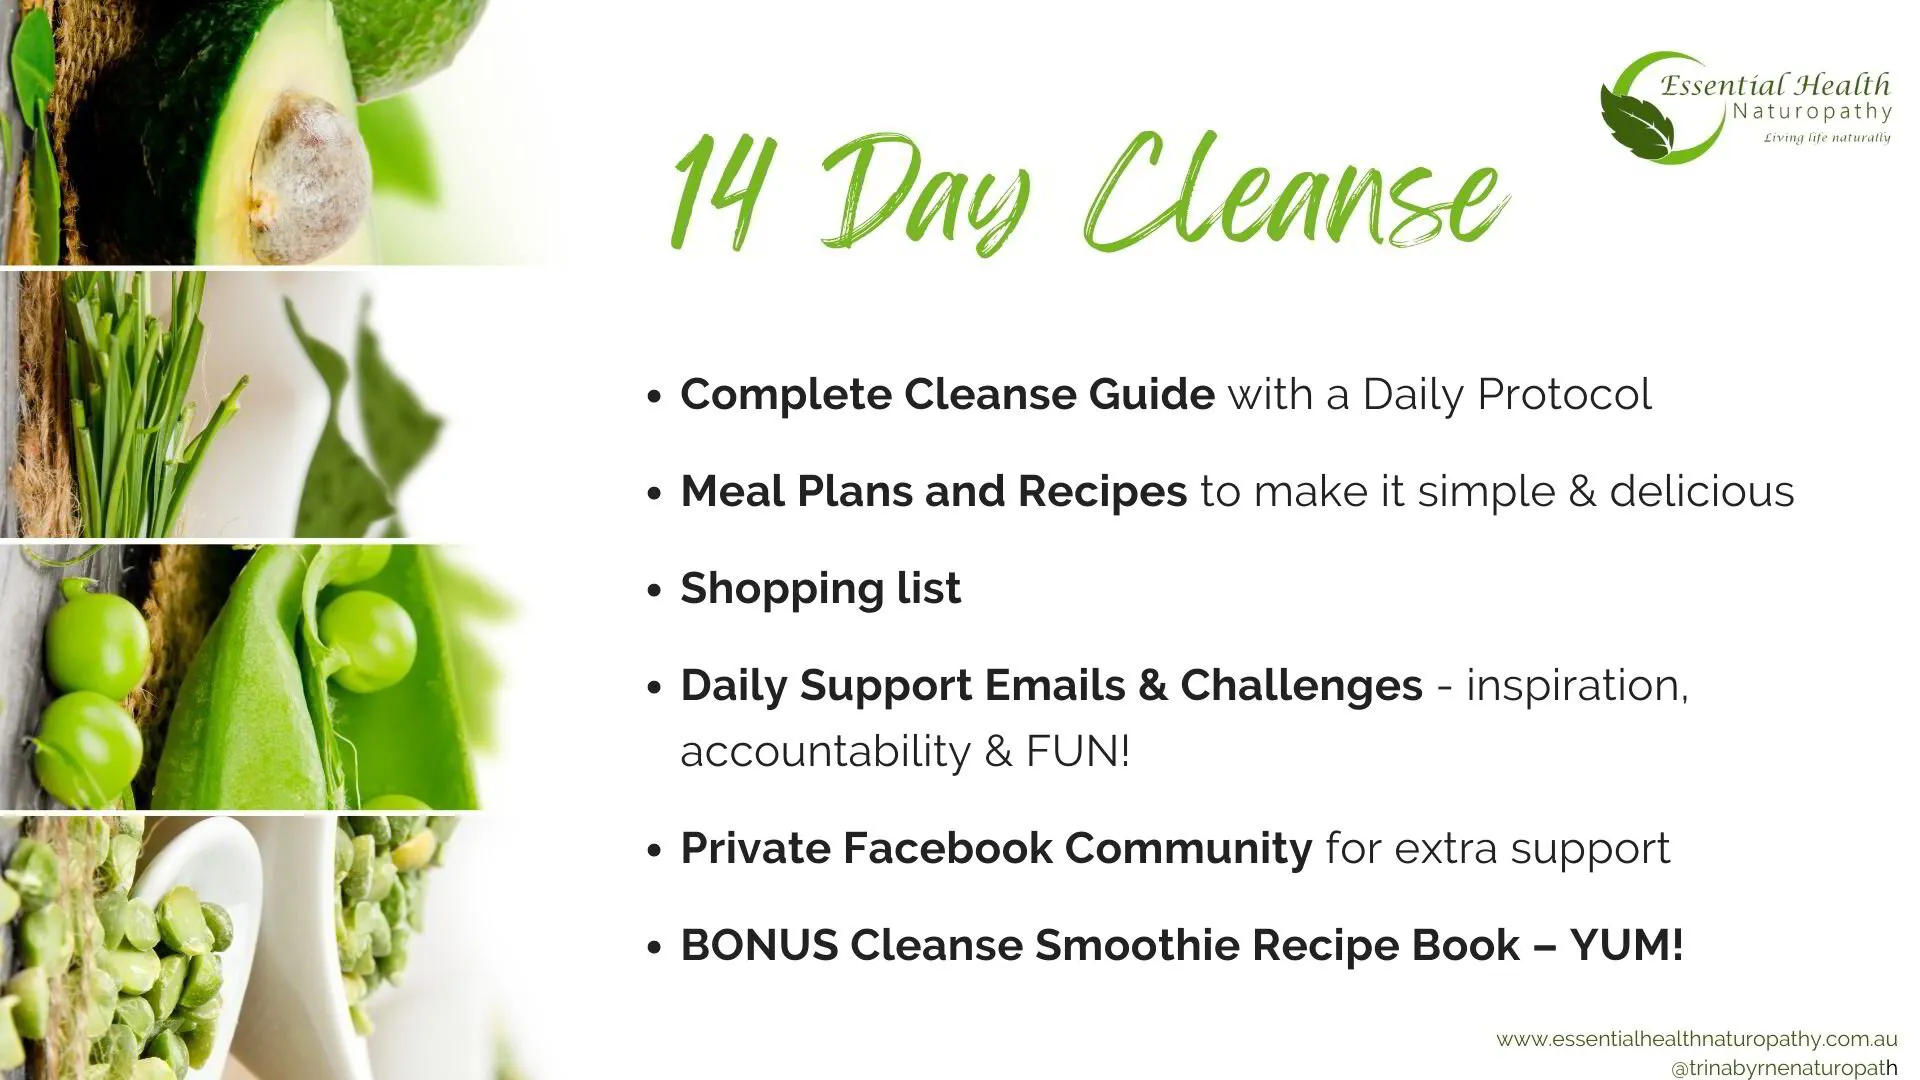 14 Day Cleanse